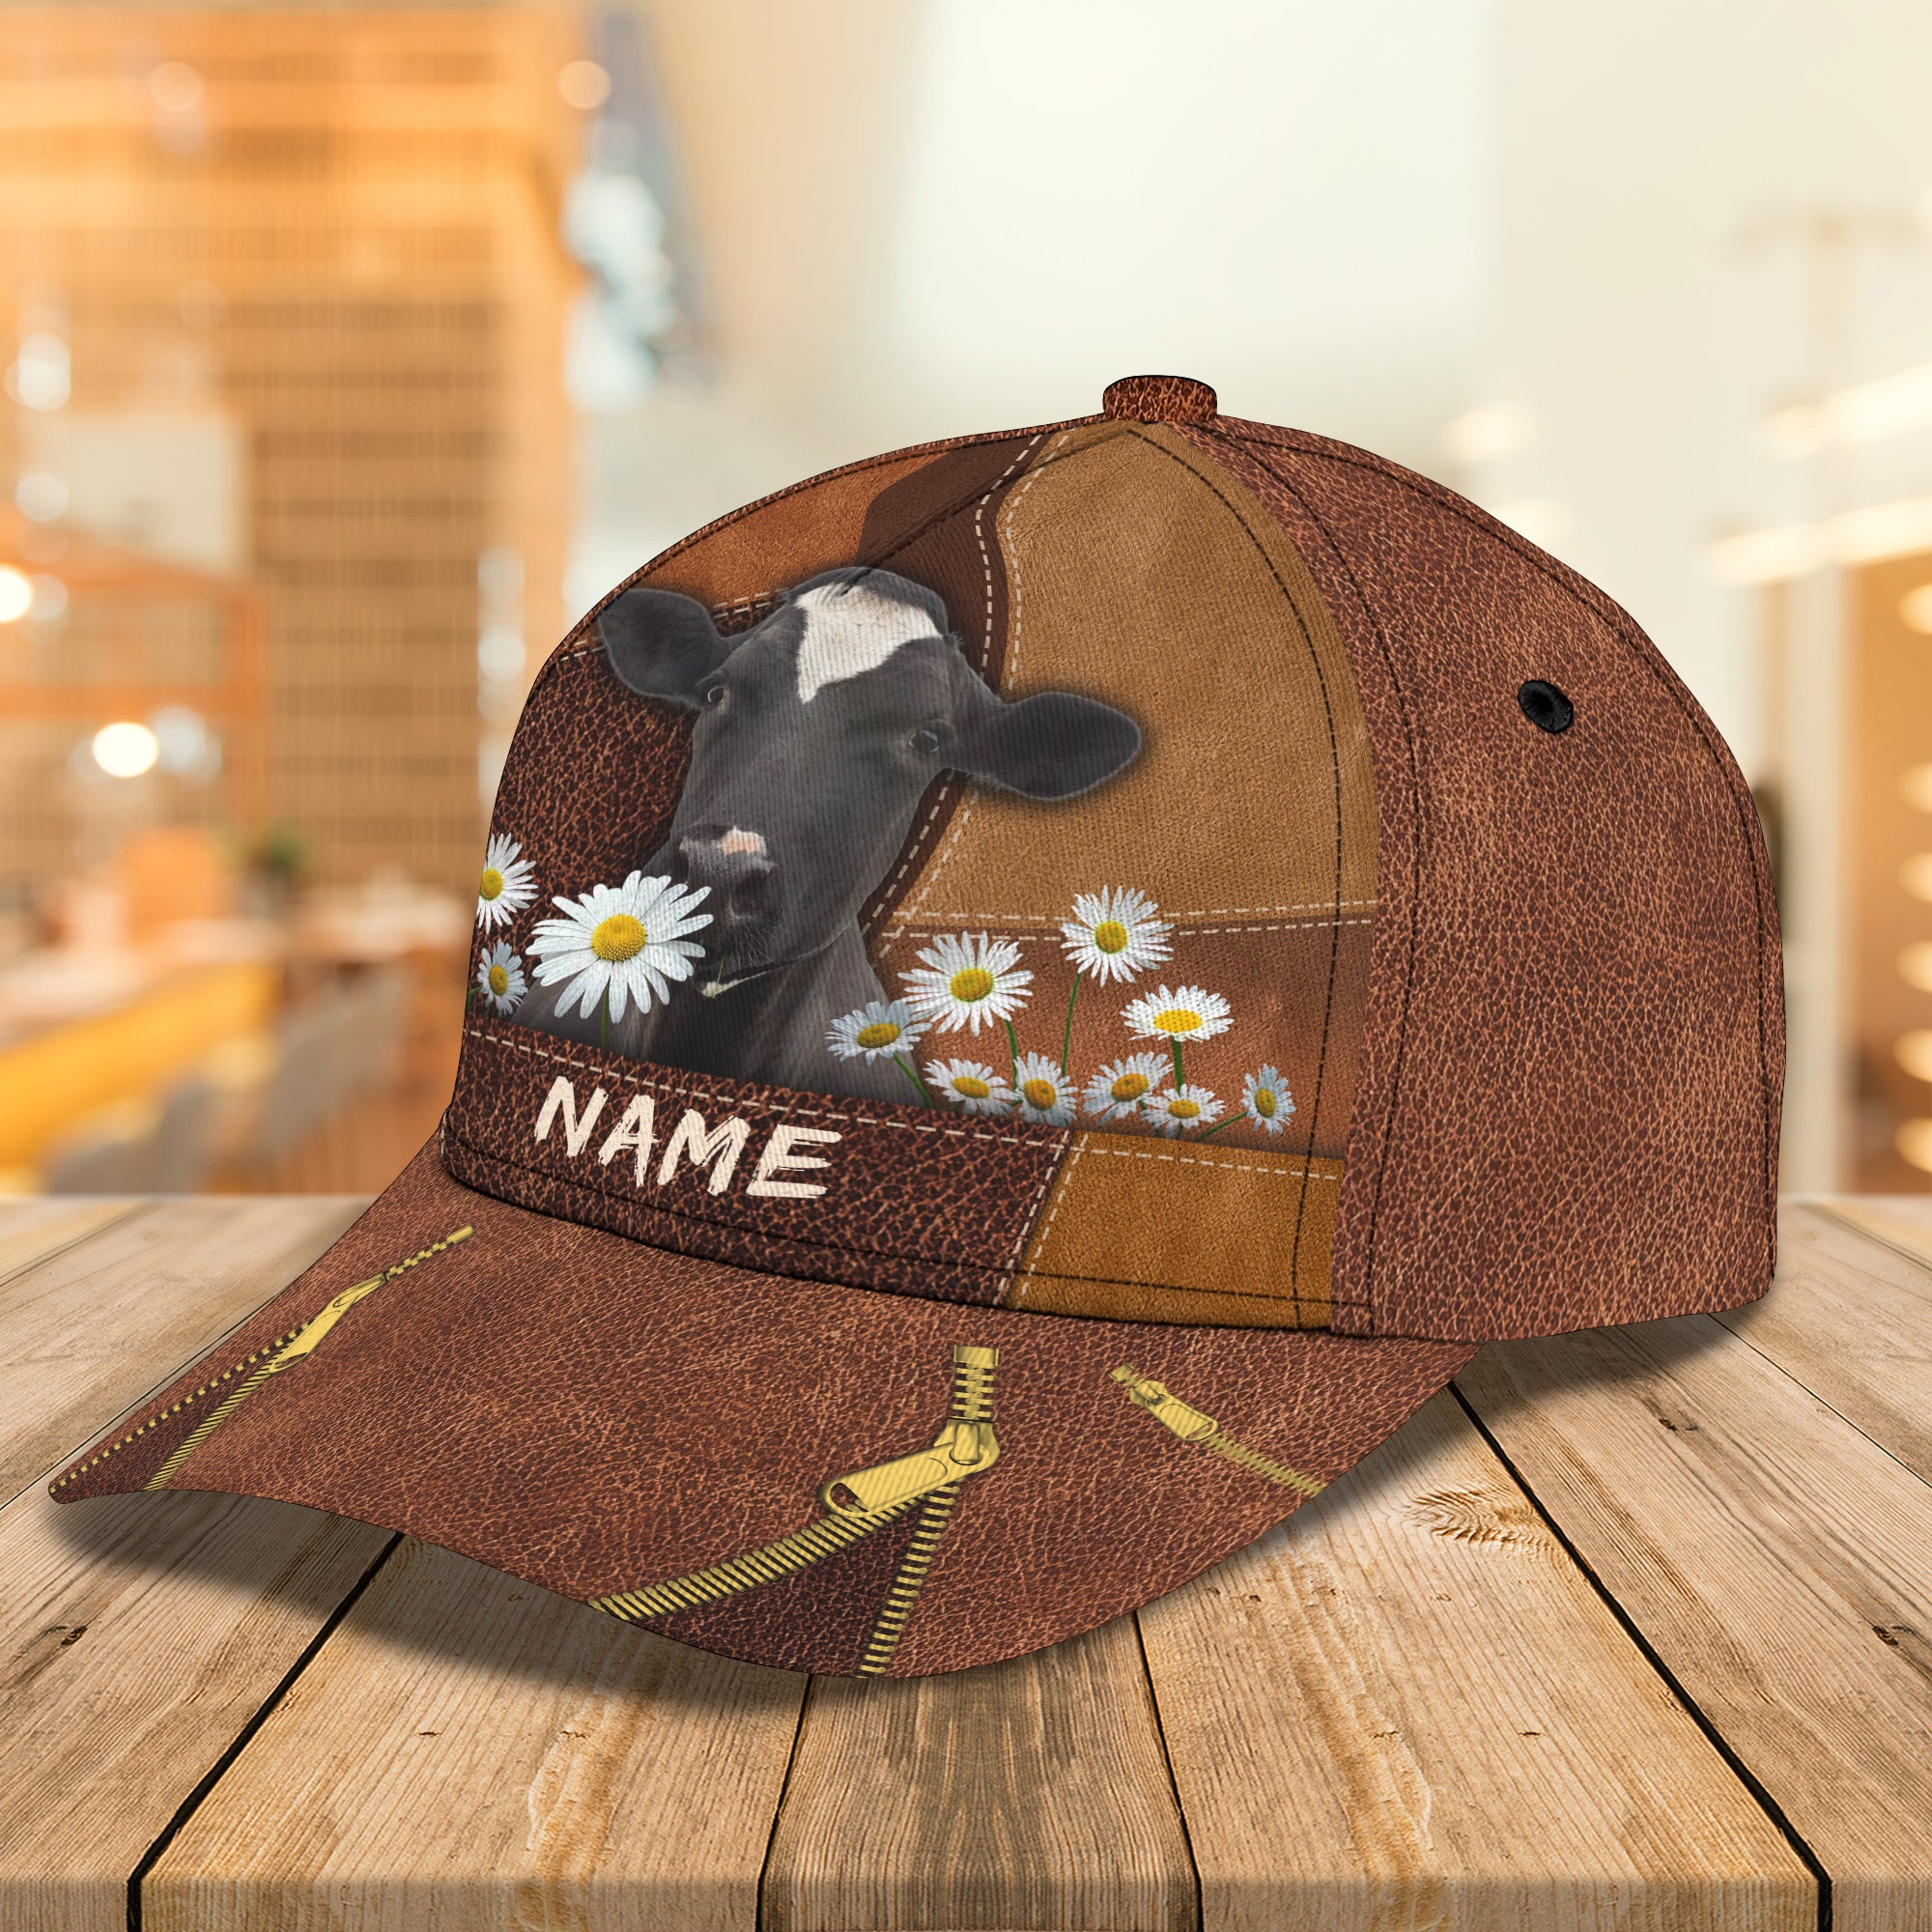 Cow - Personalized Name Cap - DAT93-010